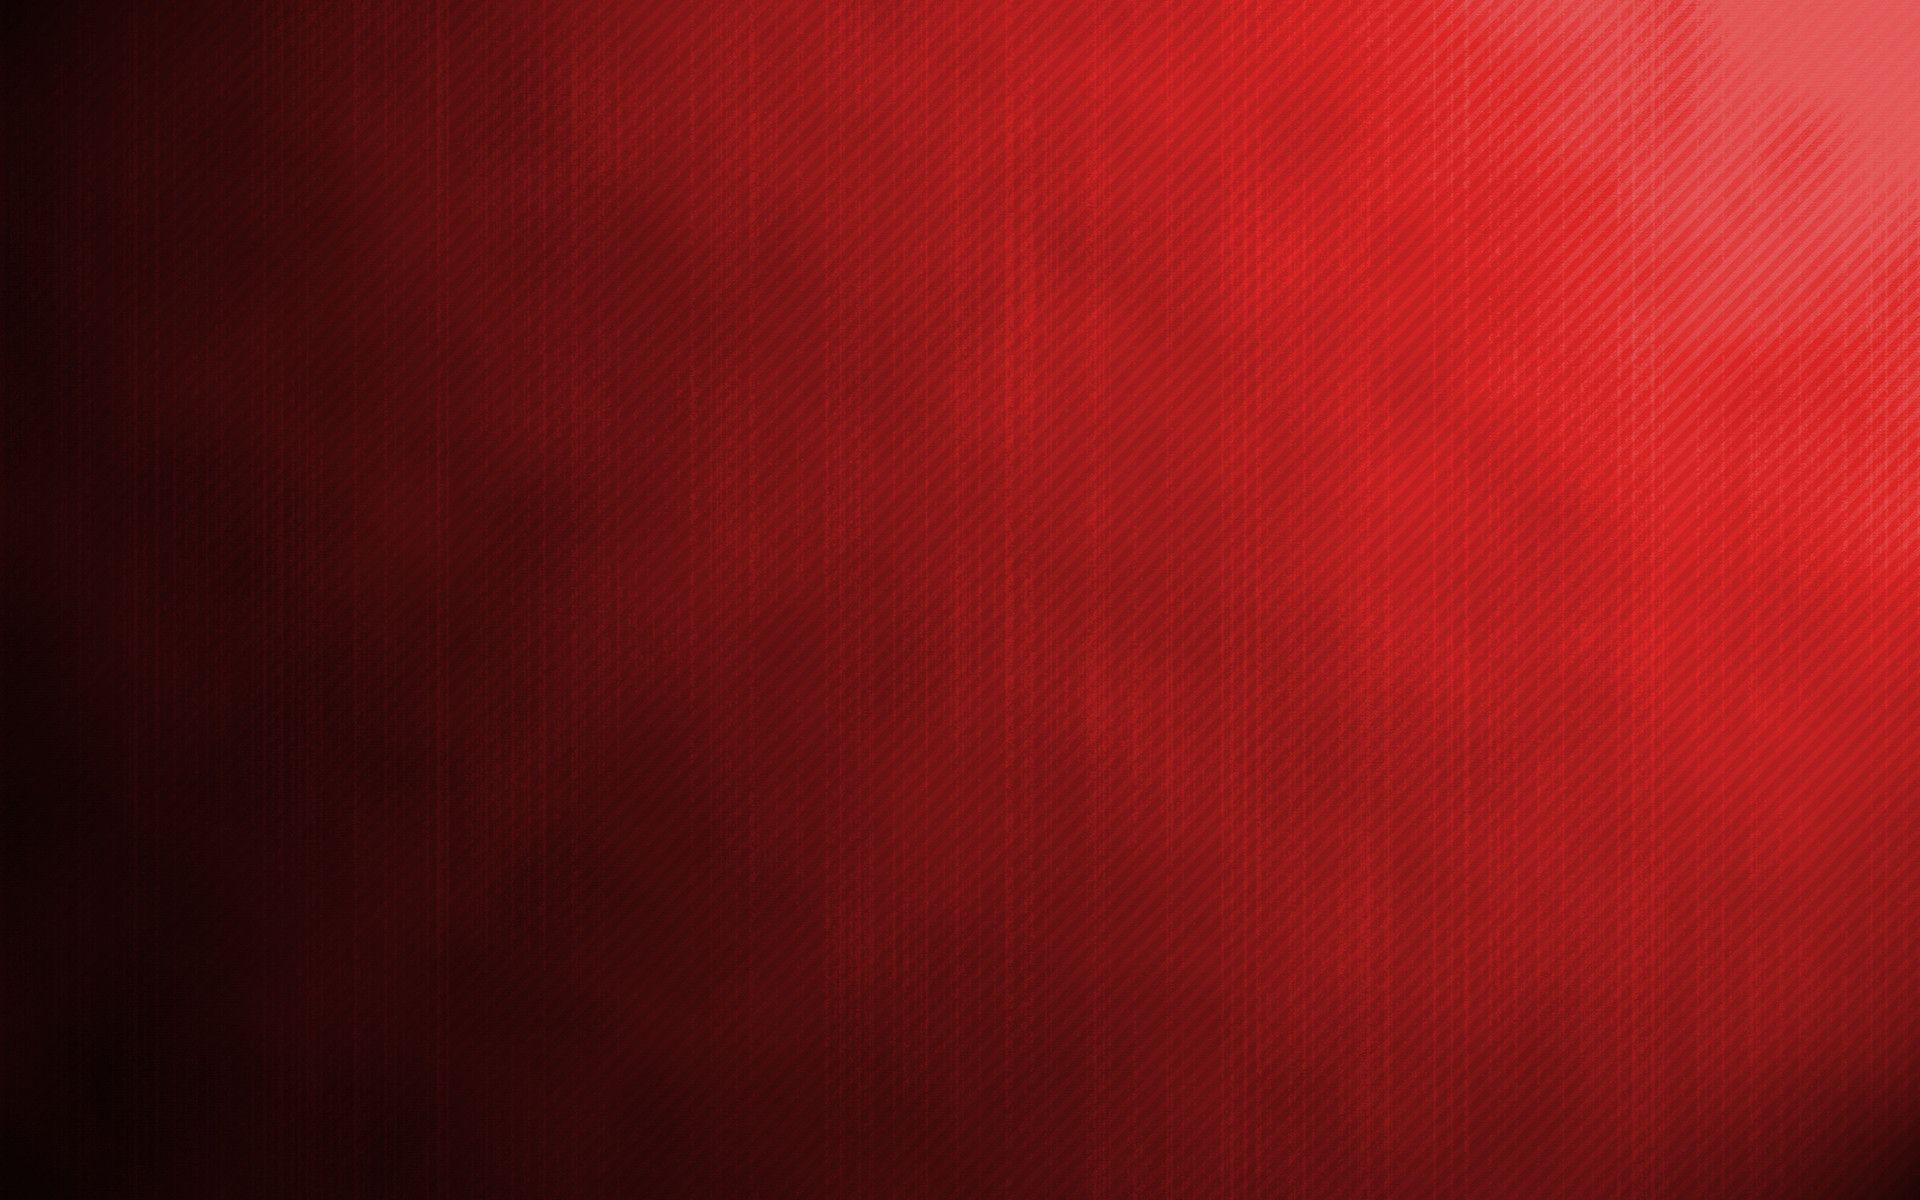 Free Simply Red Backgrounds For PowerPoint - Abstract and Textures ...